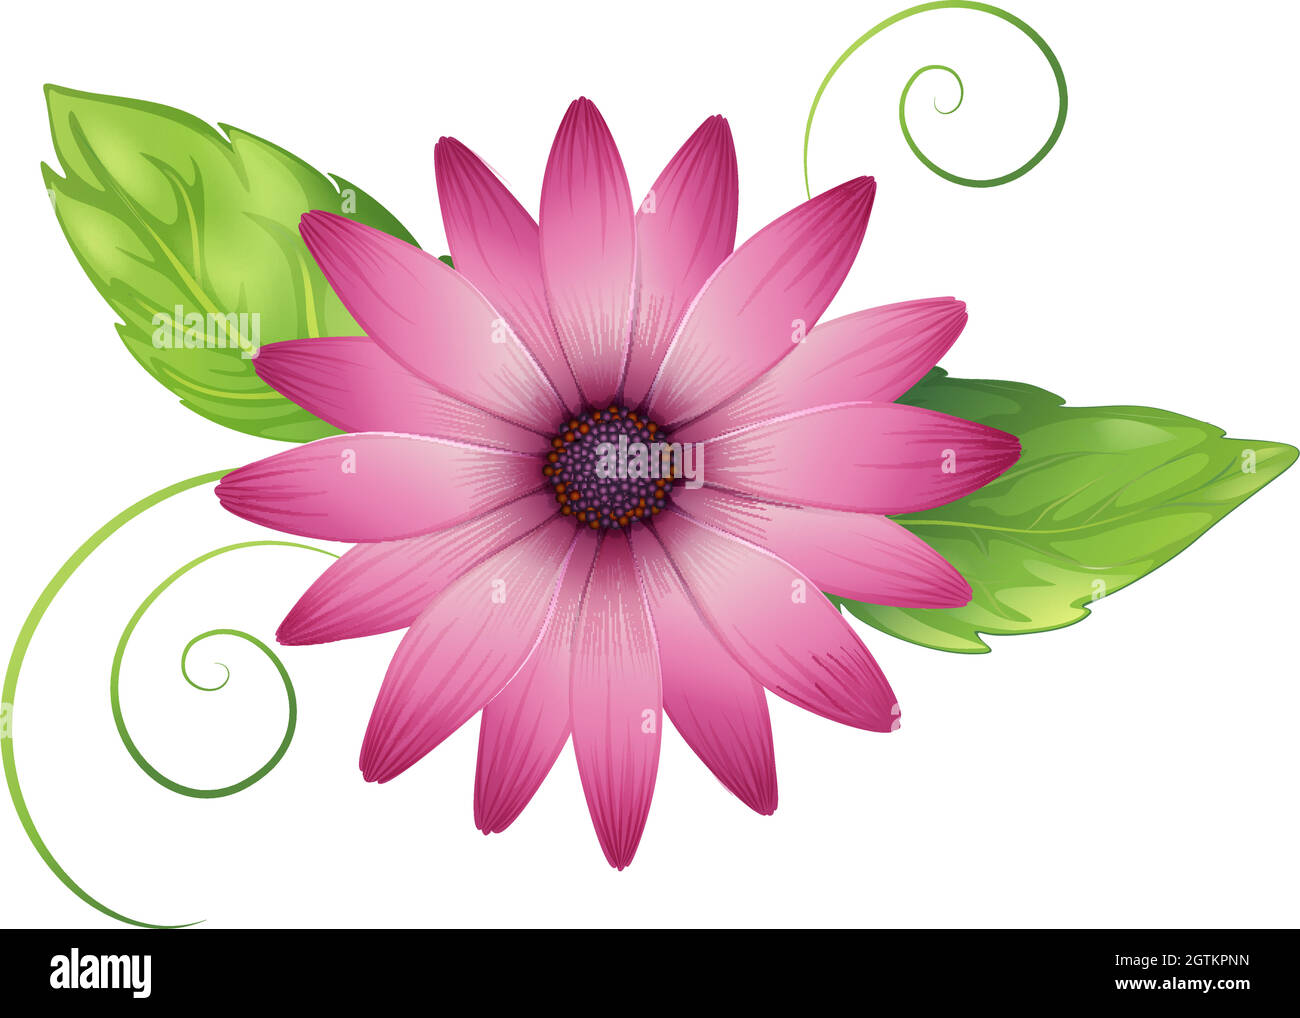 A pink flower with leaves Stock Vector